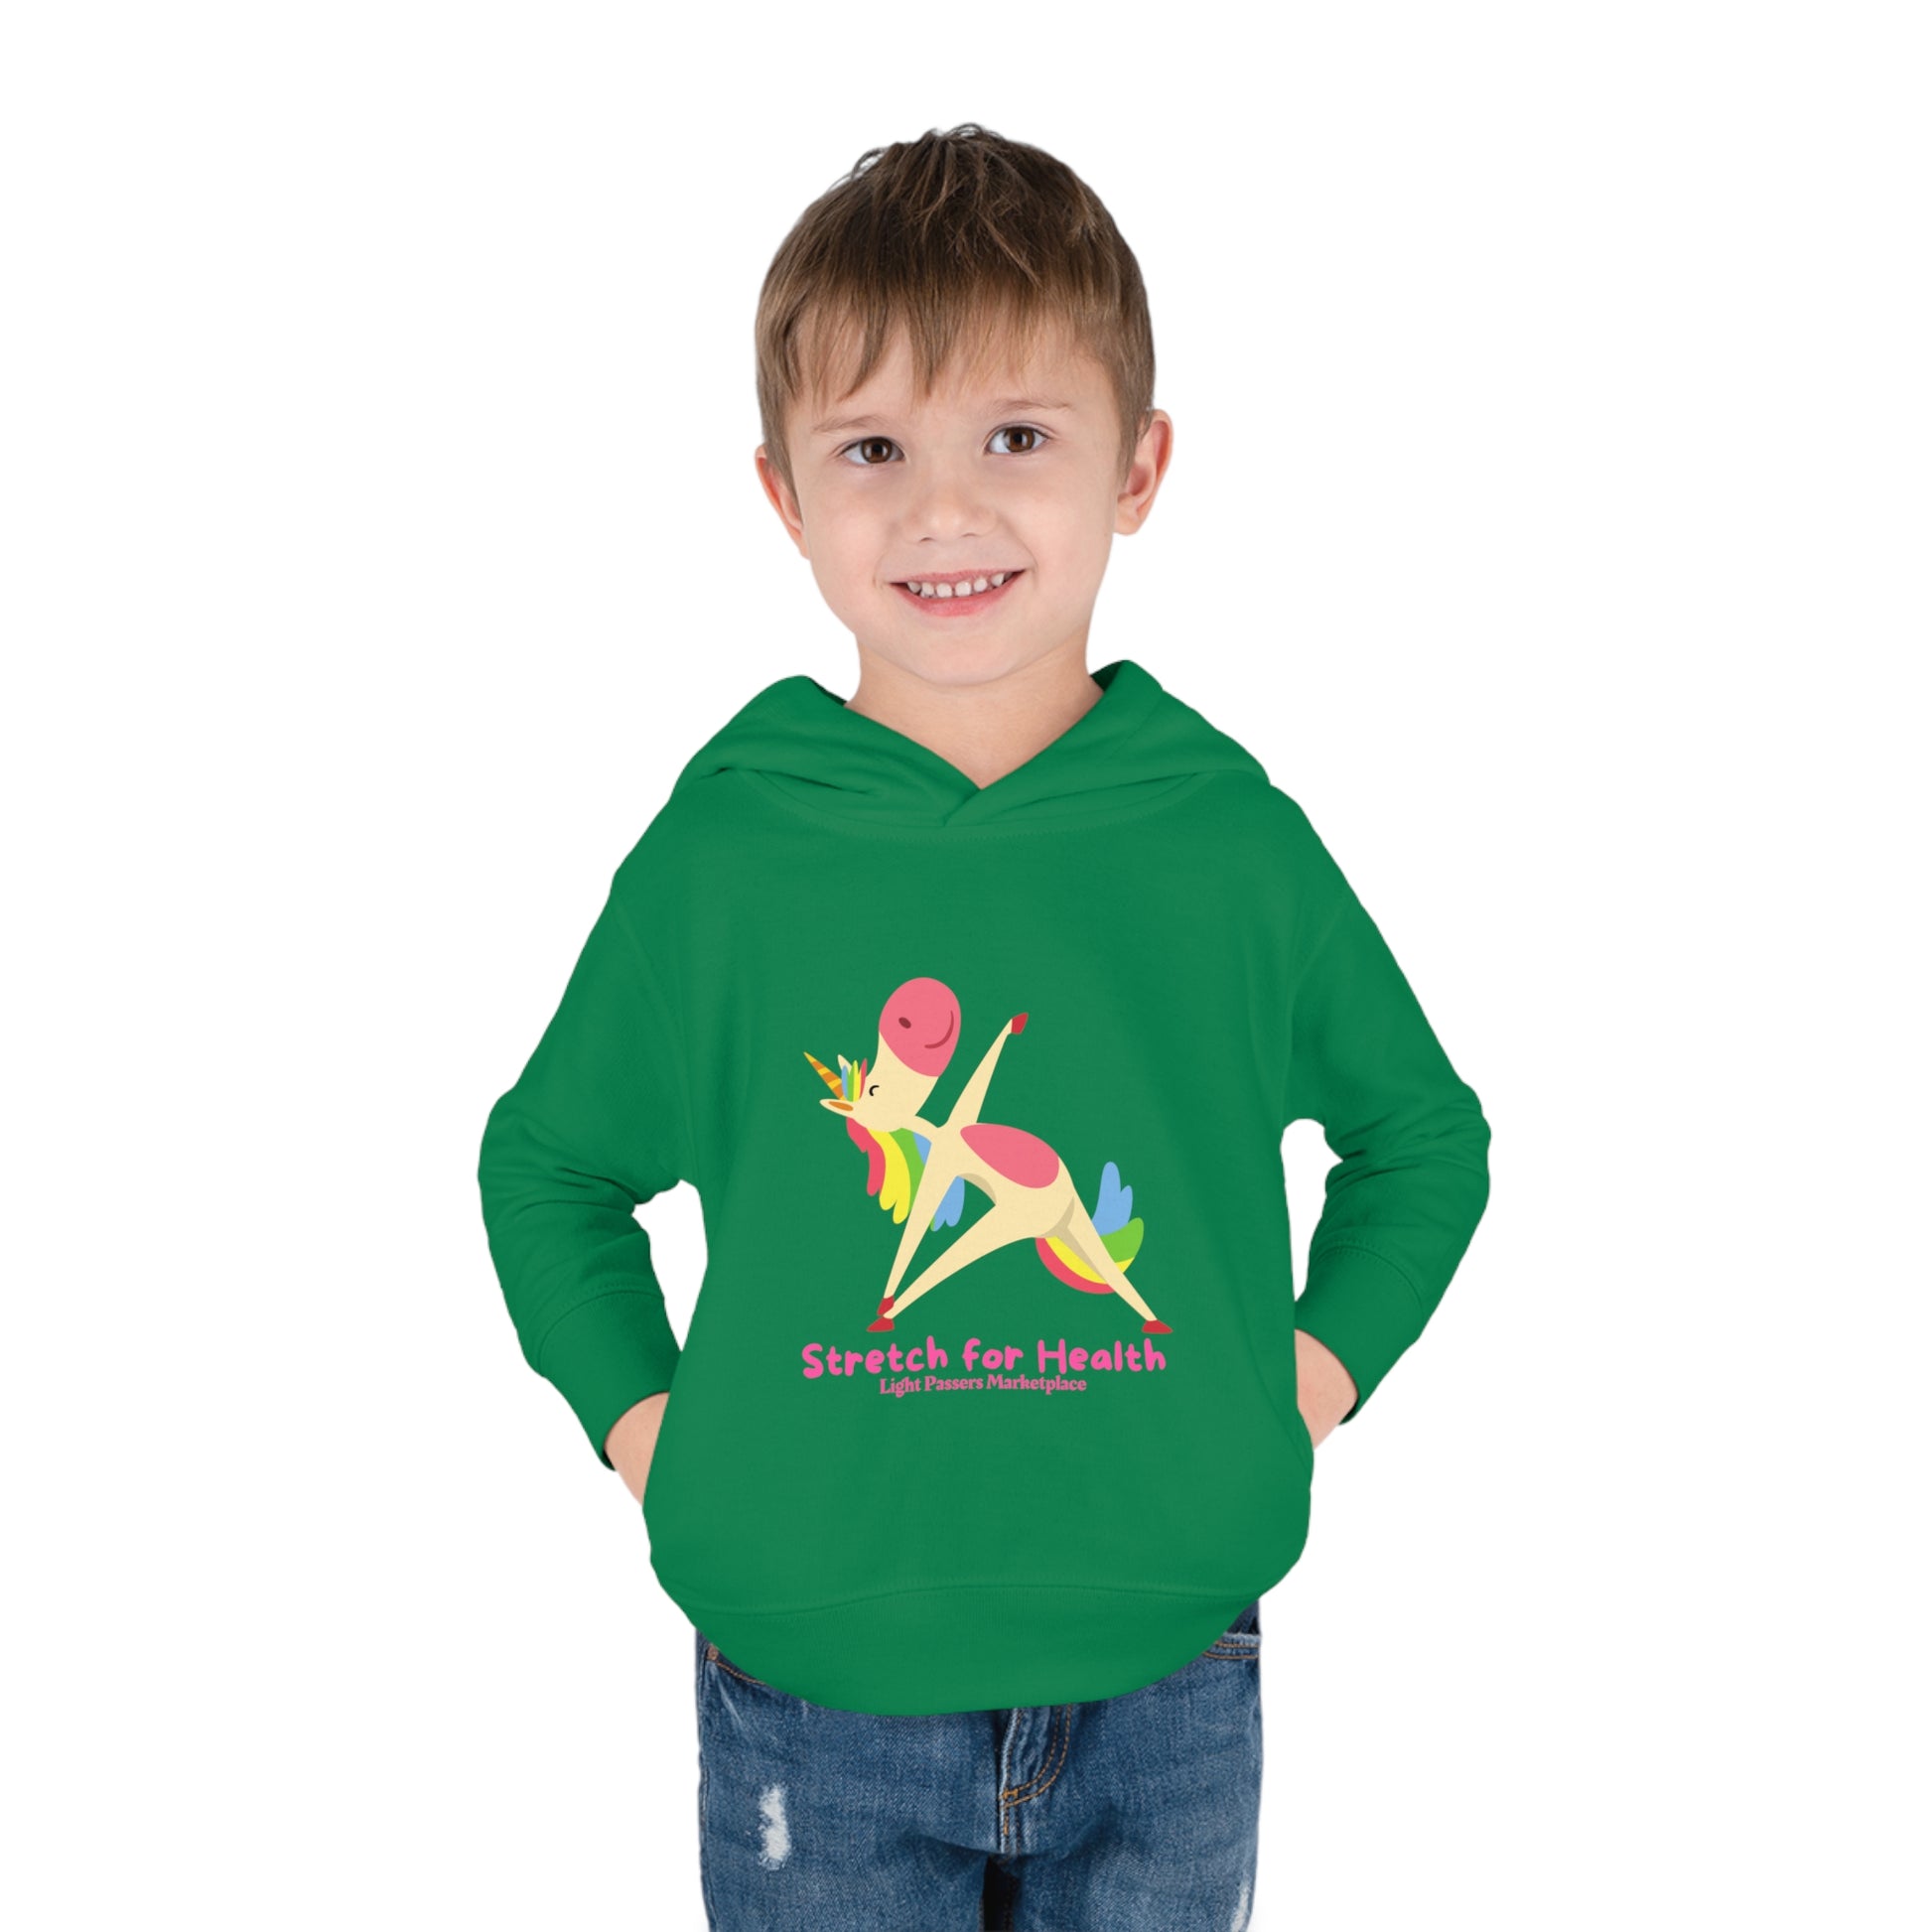 A smiling boy in a Unicorn Stretch Toddler Hooded Sweatshirt with side seam pockets. Jersey-lined hood, cover-stitched details, and durable fabric blend for cozy comfort.